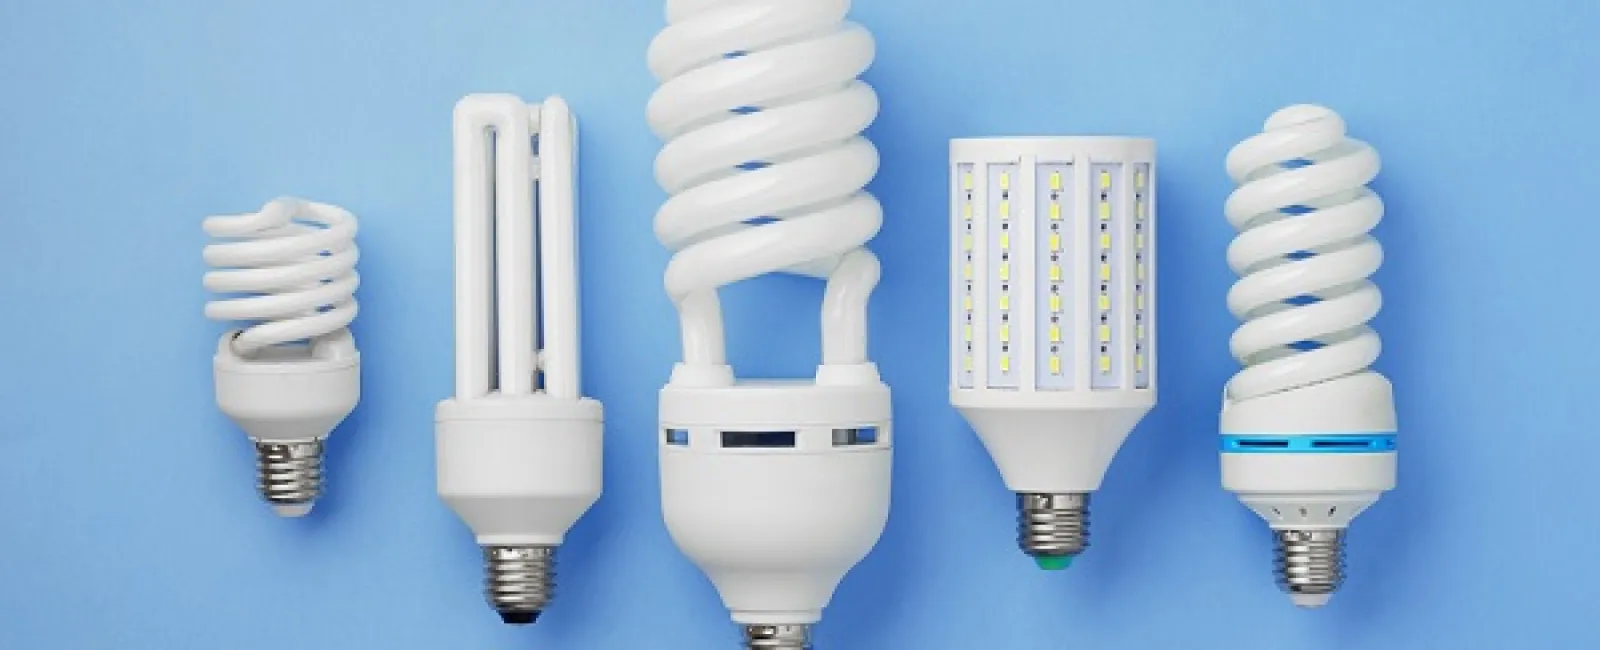 Fluorescent Light Bulbs 101: Everything you Need to Know